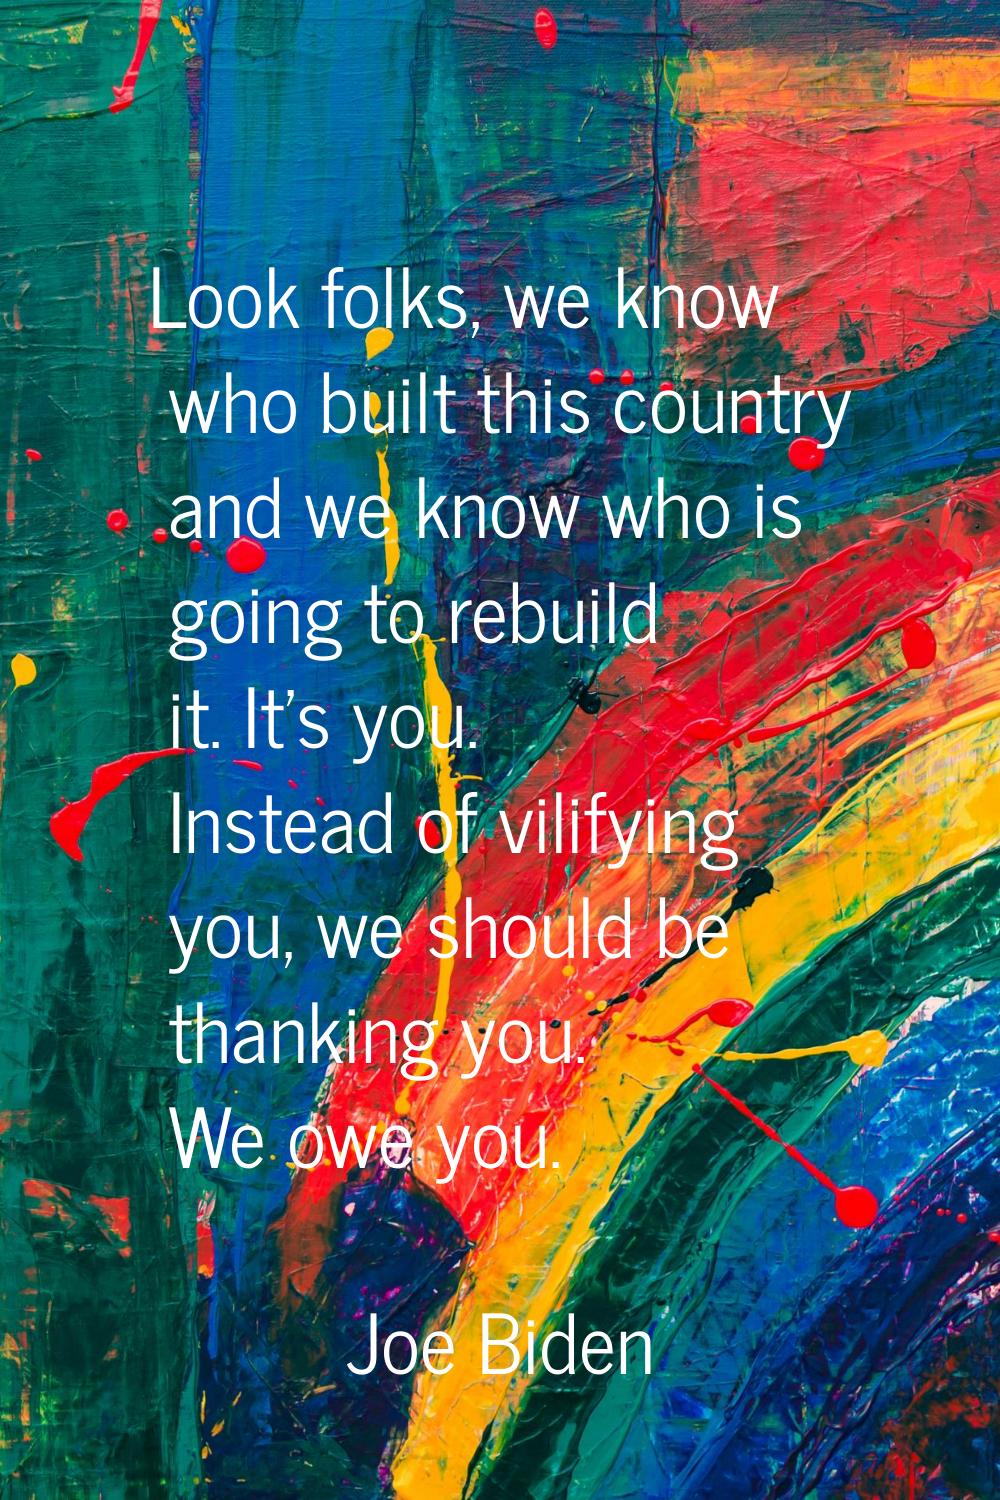 Look folks, we know who built this country and we know who is going to rebuild it. It's you. Instea